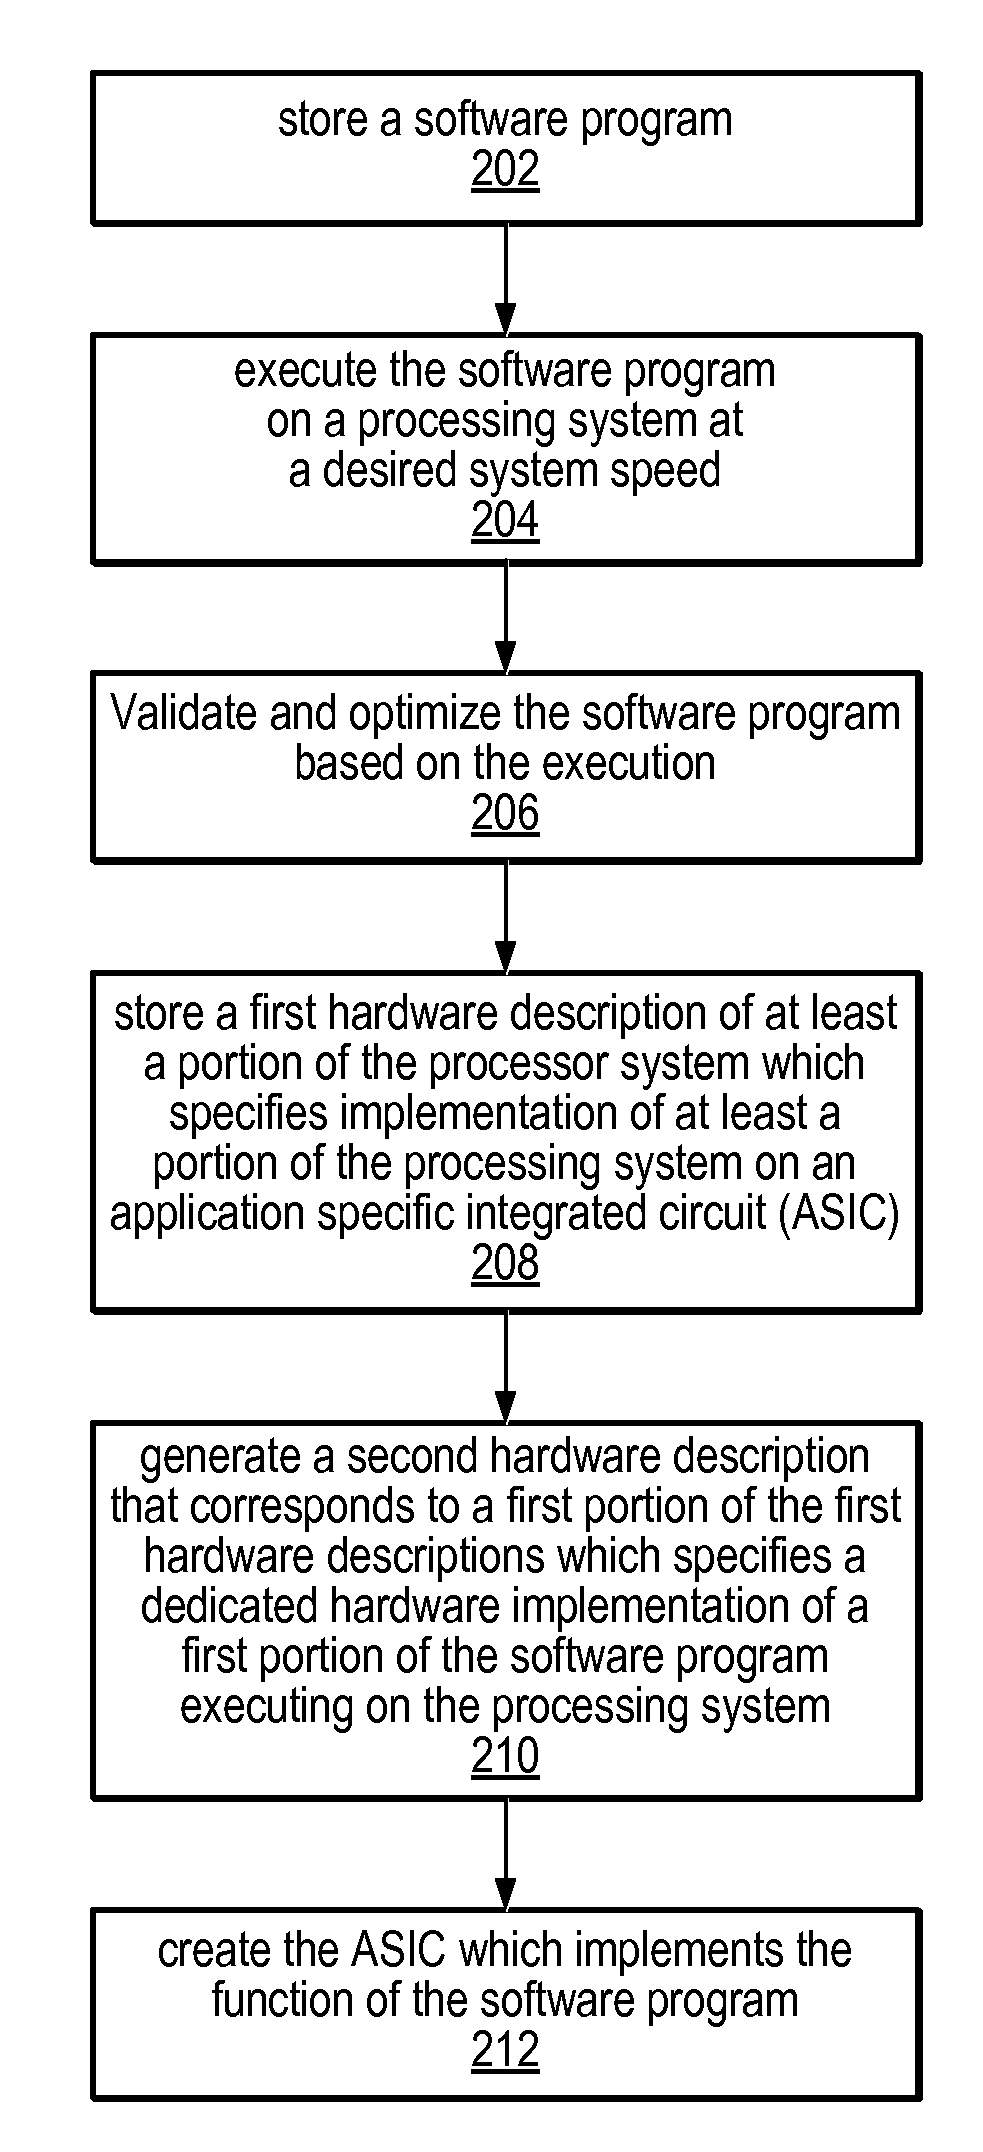 Designing an ASIC Based on Execution of a Software Program on a Processing System